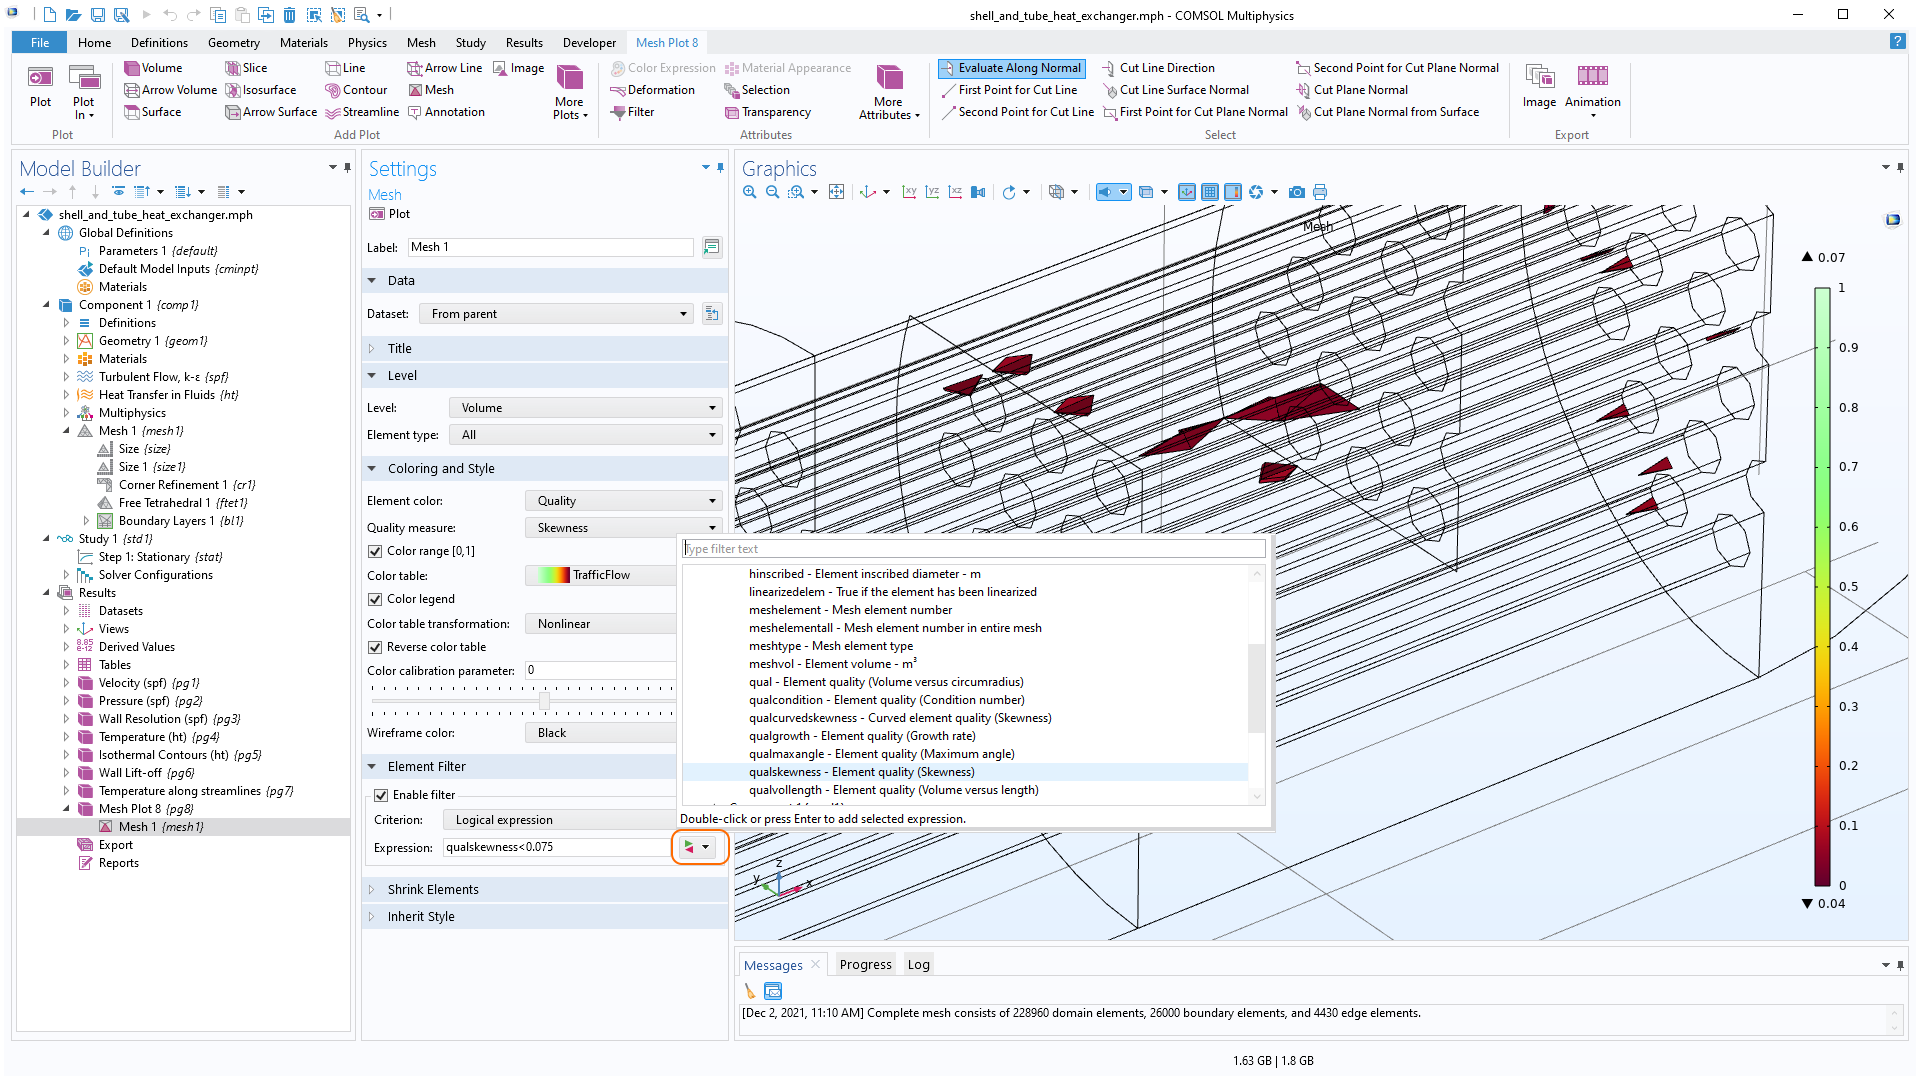 The COMSOL Multiphysics UI showing the Model Builder with the Mesh node selected, the corresponding Settings window, and a shell-and-tube heat exchanger model in the Graphics window. The Replace Expression window is displayed in front of the Settings and Graphics window, which gives easy access to the different quality measures.